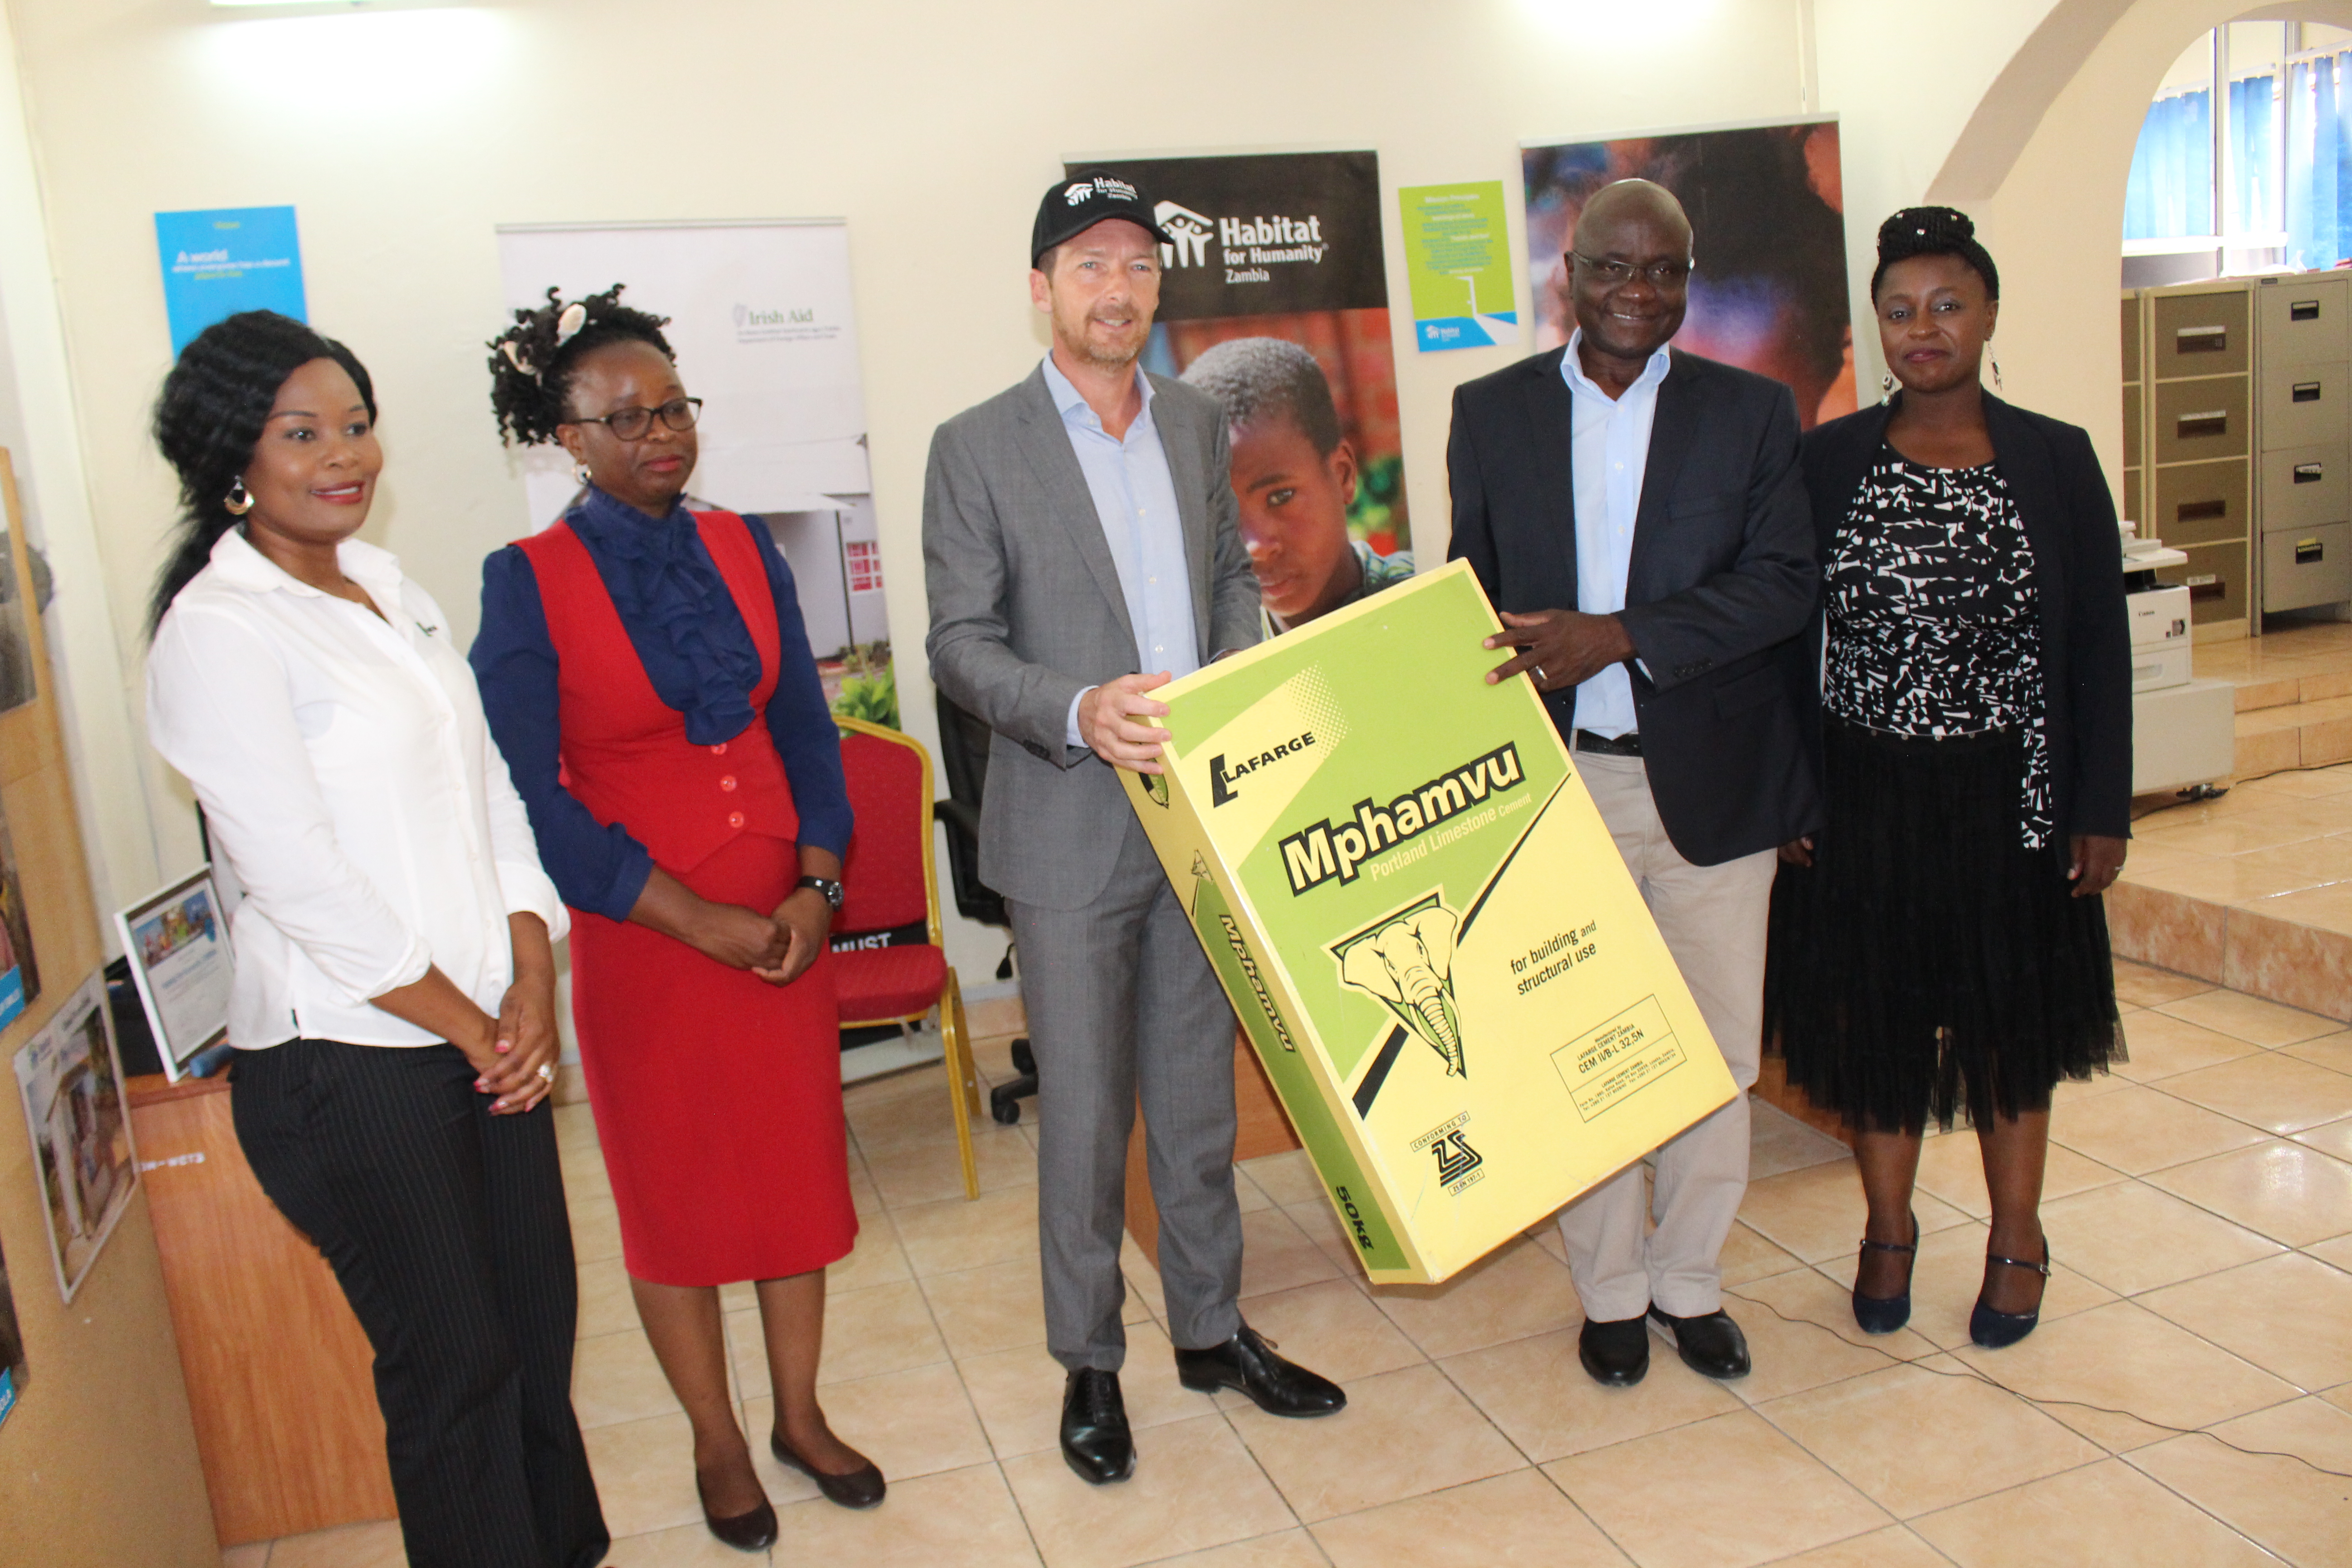 LAFARGE ZAMBIA DONATES 1000 BAGS OF CEMENT TO HABITAT FOR HUMANITY ZAMBIA